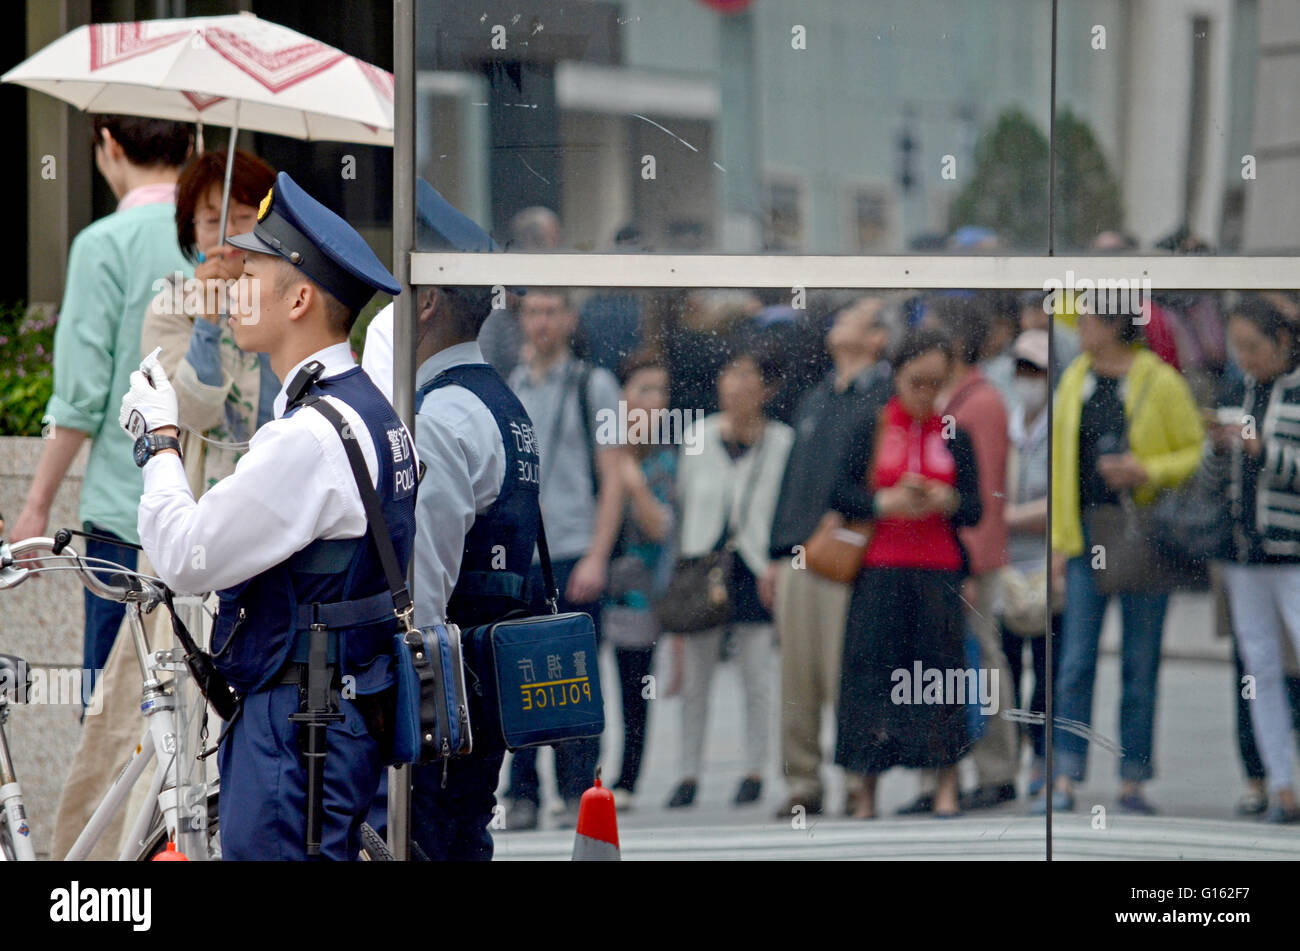 Tokyo, Japan. 9th May, 2016. A japanese Police officer overlooks a busy intersectio in the comersial Ginza District. May 9, 2016. Photo by: Ramiro Agustin Vargas Tabares. © Ramiro Agustin Vargas Tabares/ZUMA Wire/Alamy Live News Stock Photo